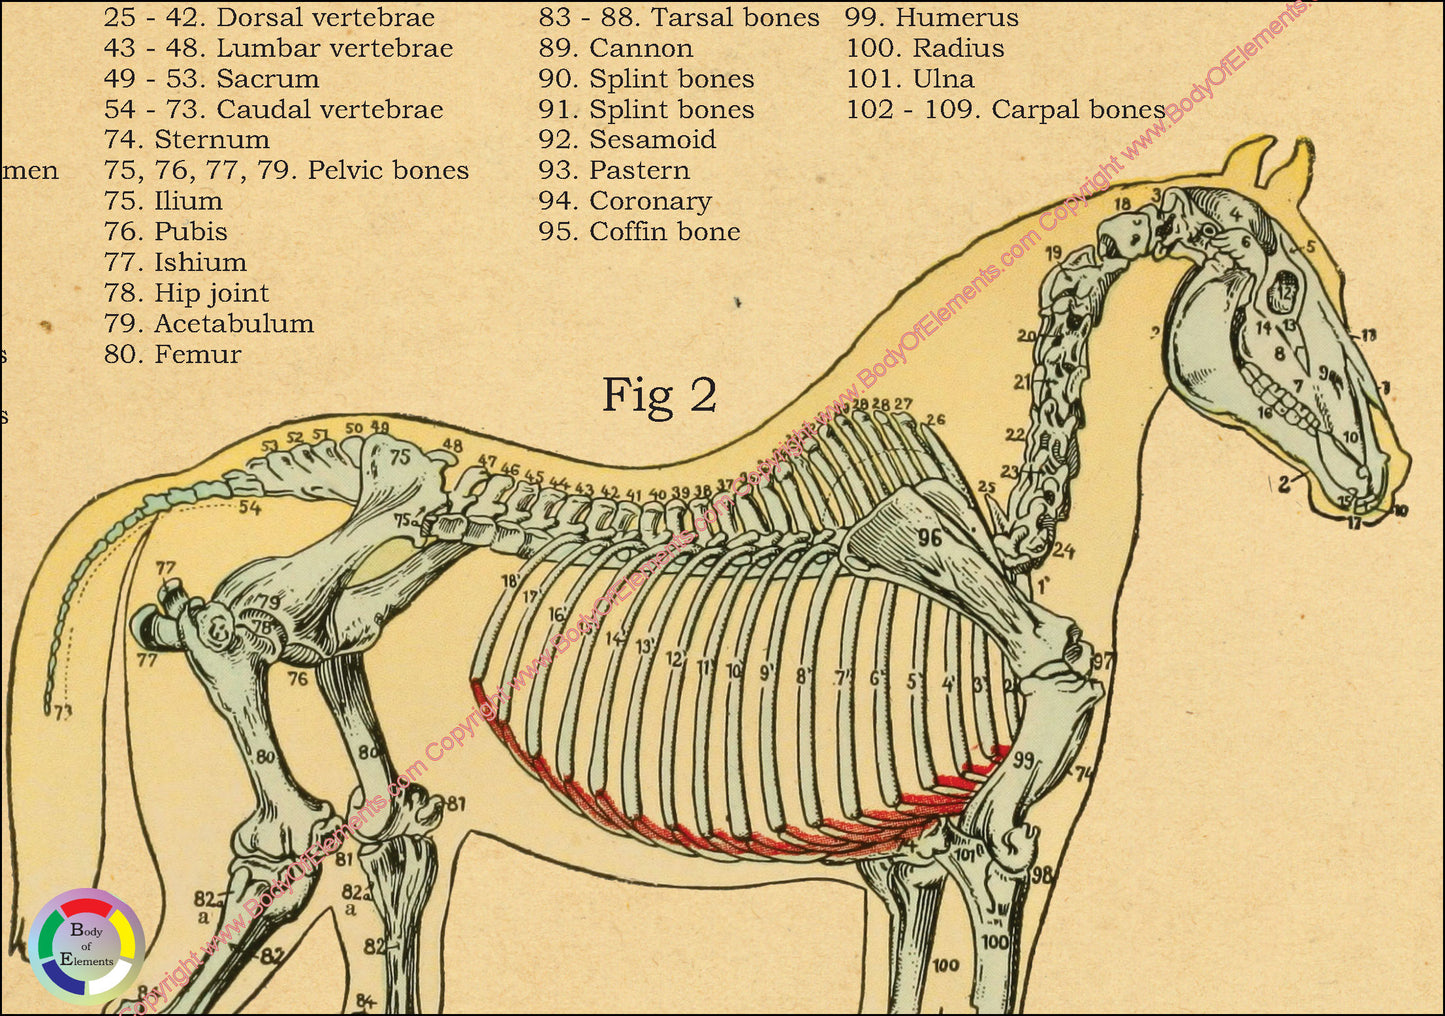 The skeletal anatomy of the horse